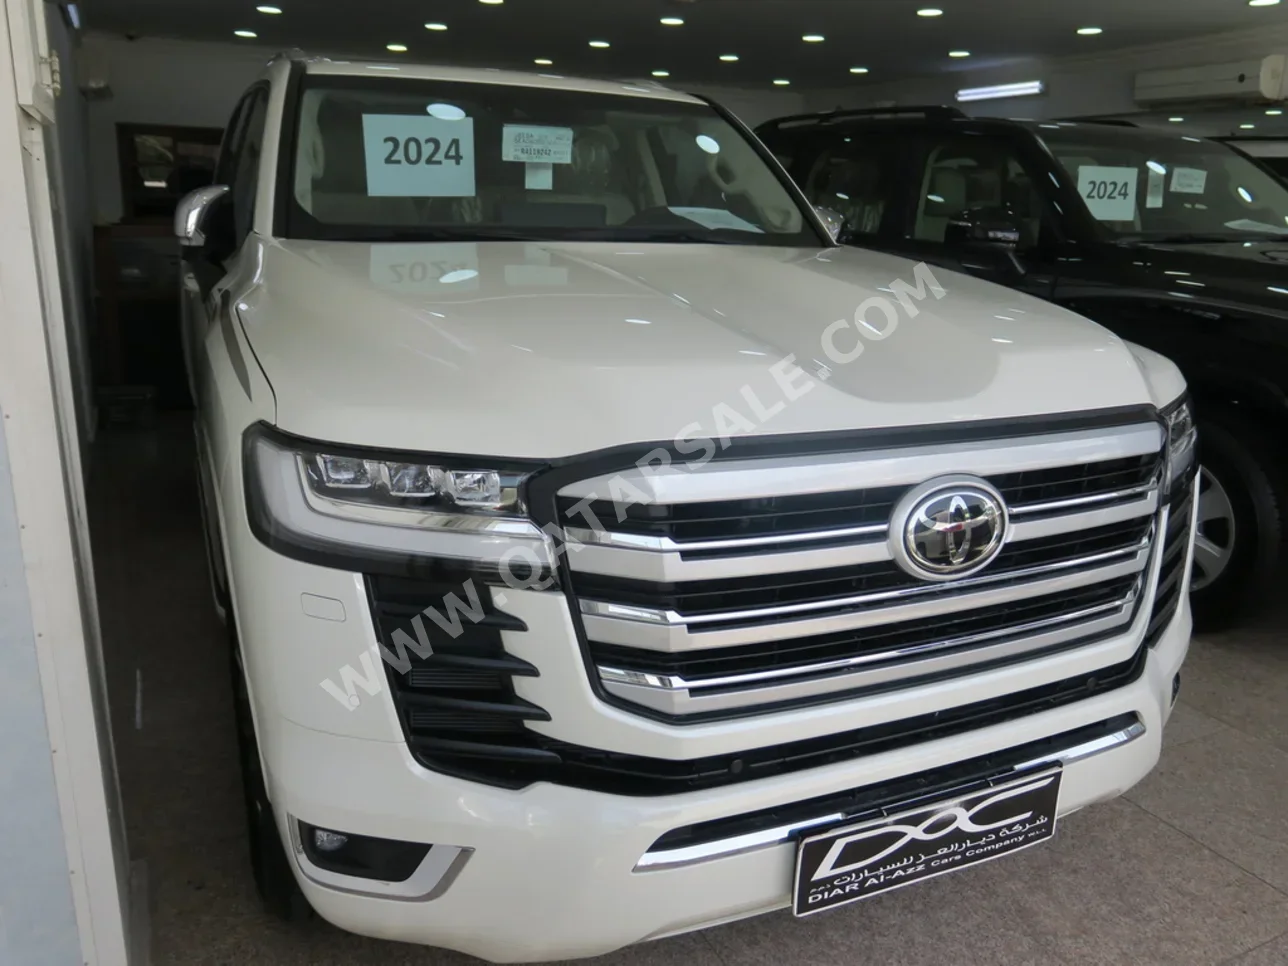 Toyota  Land Cruiser  VXR Twin Turbo  2024  Automatic  0 Km  6 Cylinder  Four Wheel Drive (4WD)  SUV  White  With Warranty